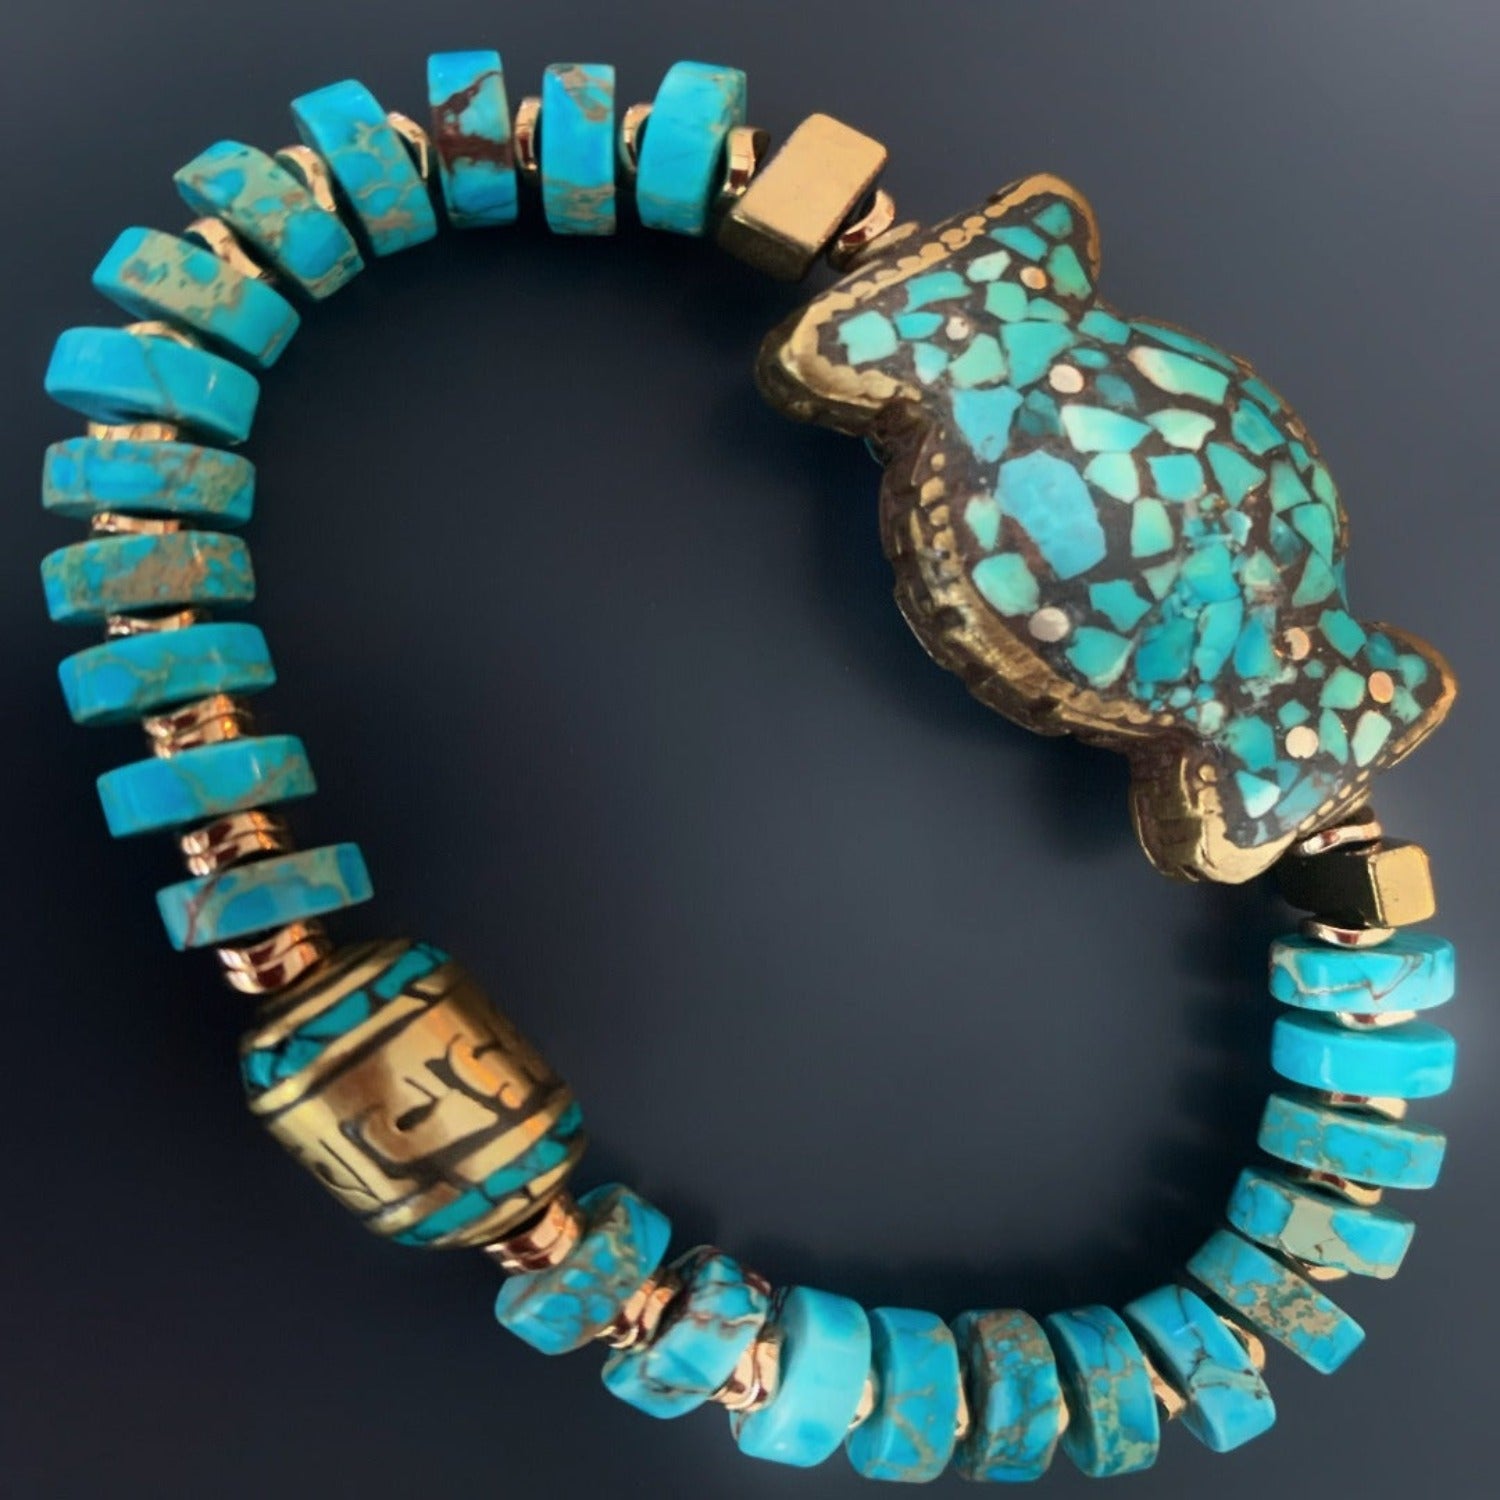 Large antique gold plated mosaic turquoise bead as centerpiece